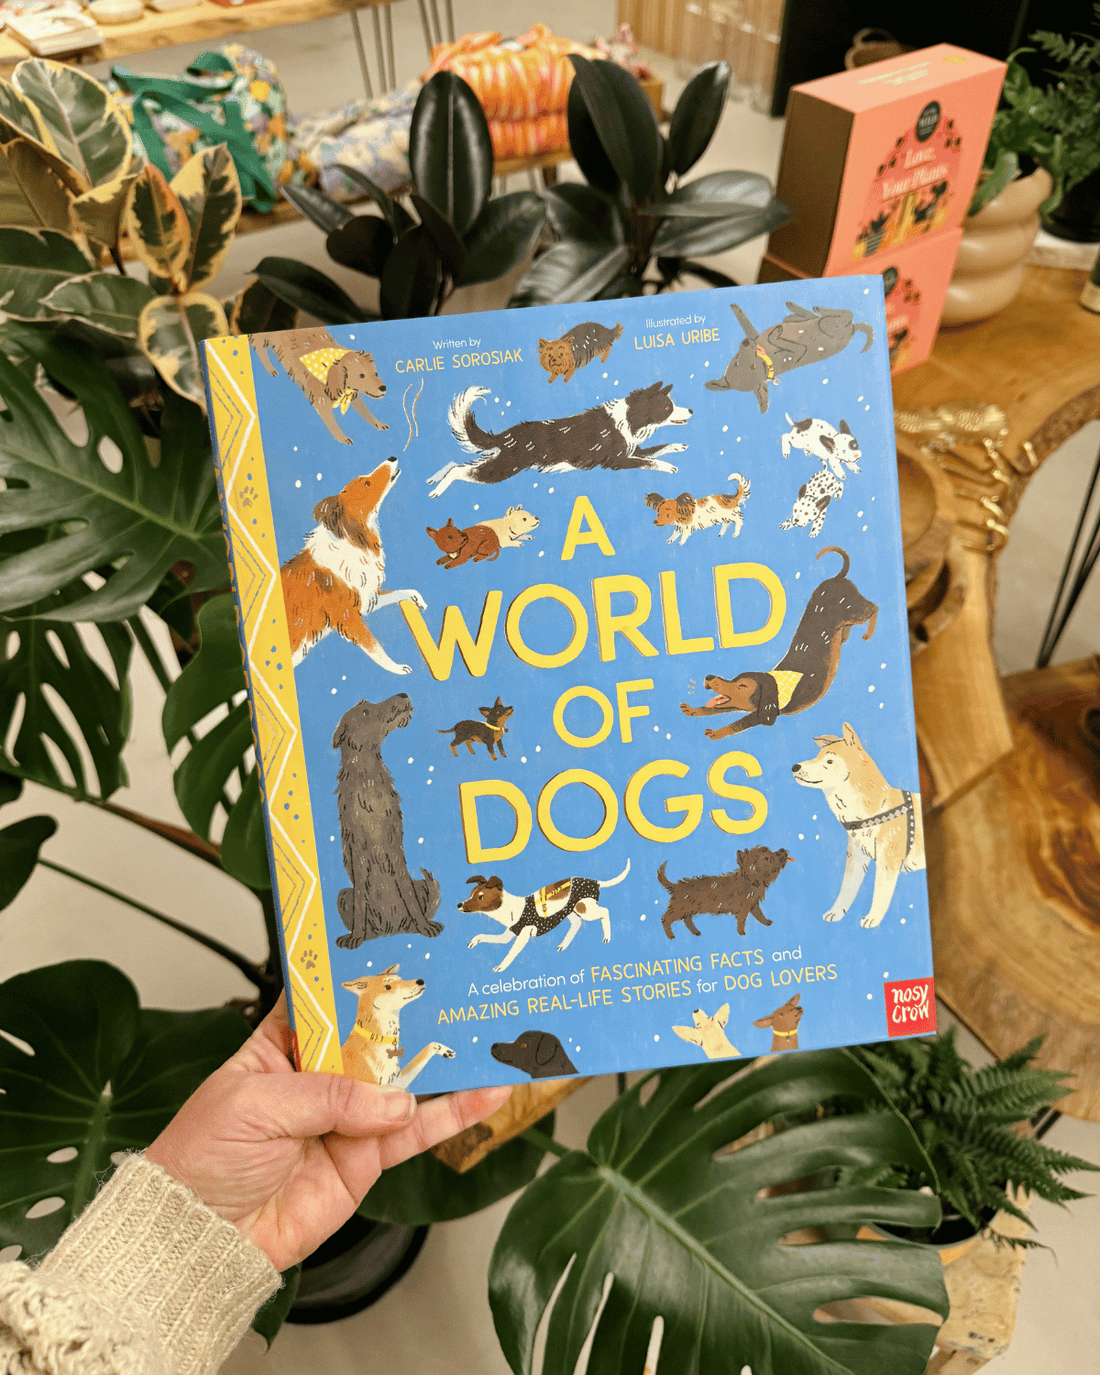 Childrens Book - A World of Dogs by Carlie Sorosiak